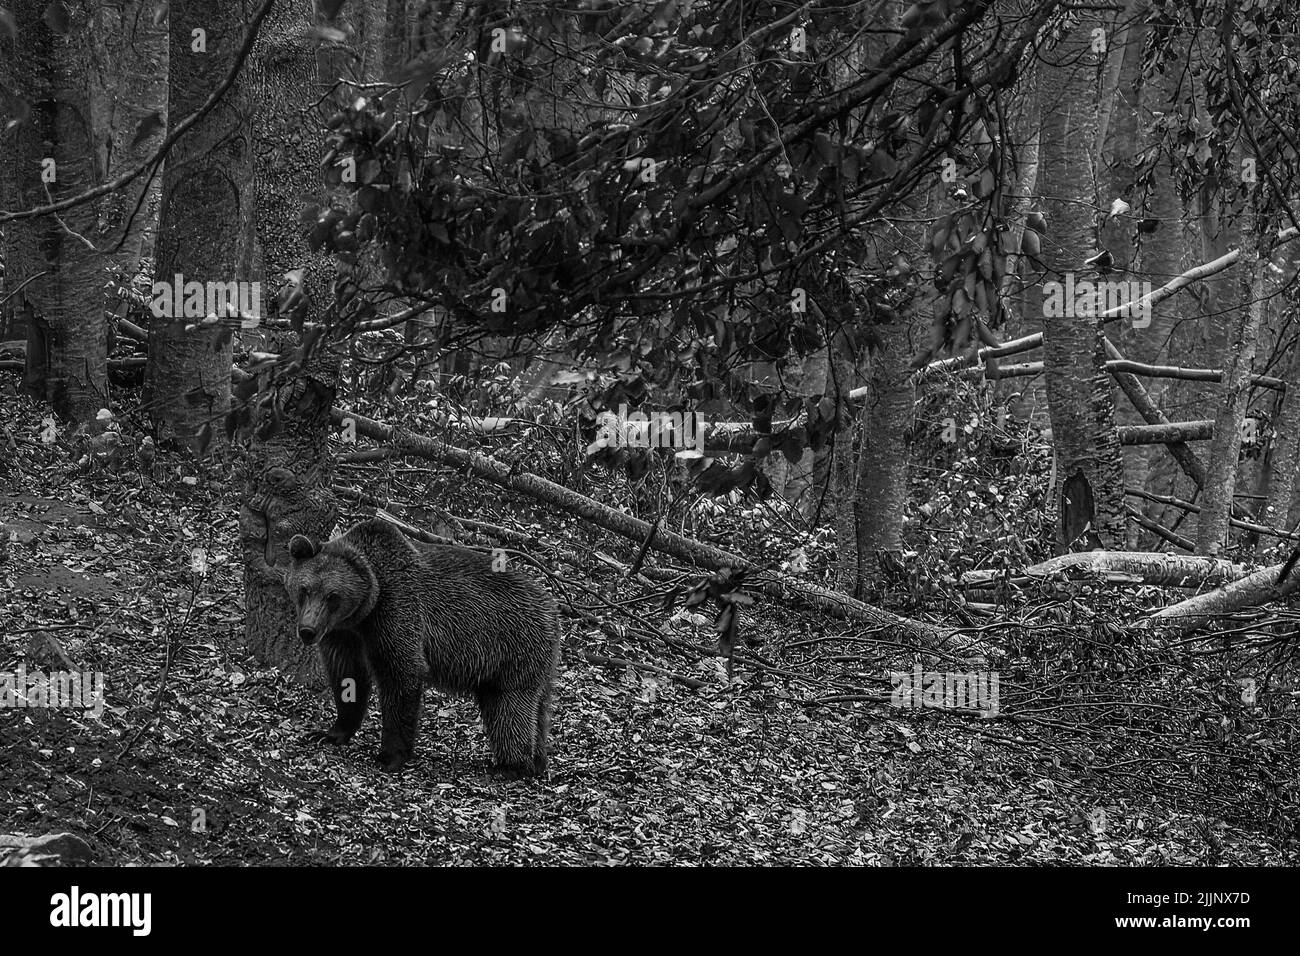 A shallow focus grayscale shot of a grizzly bear walking on fallen autumn leaves on the ground of the forest Stock Photo